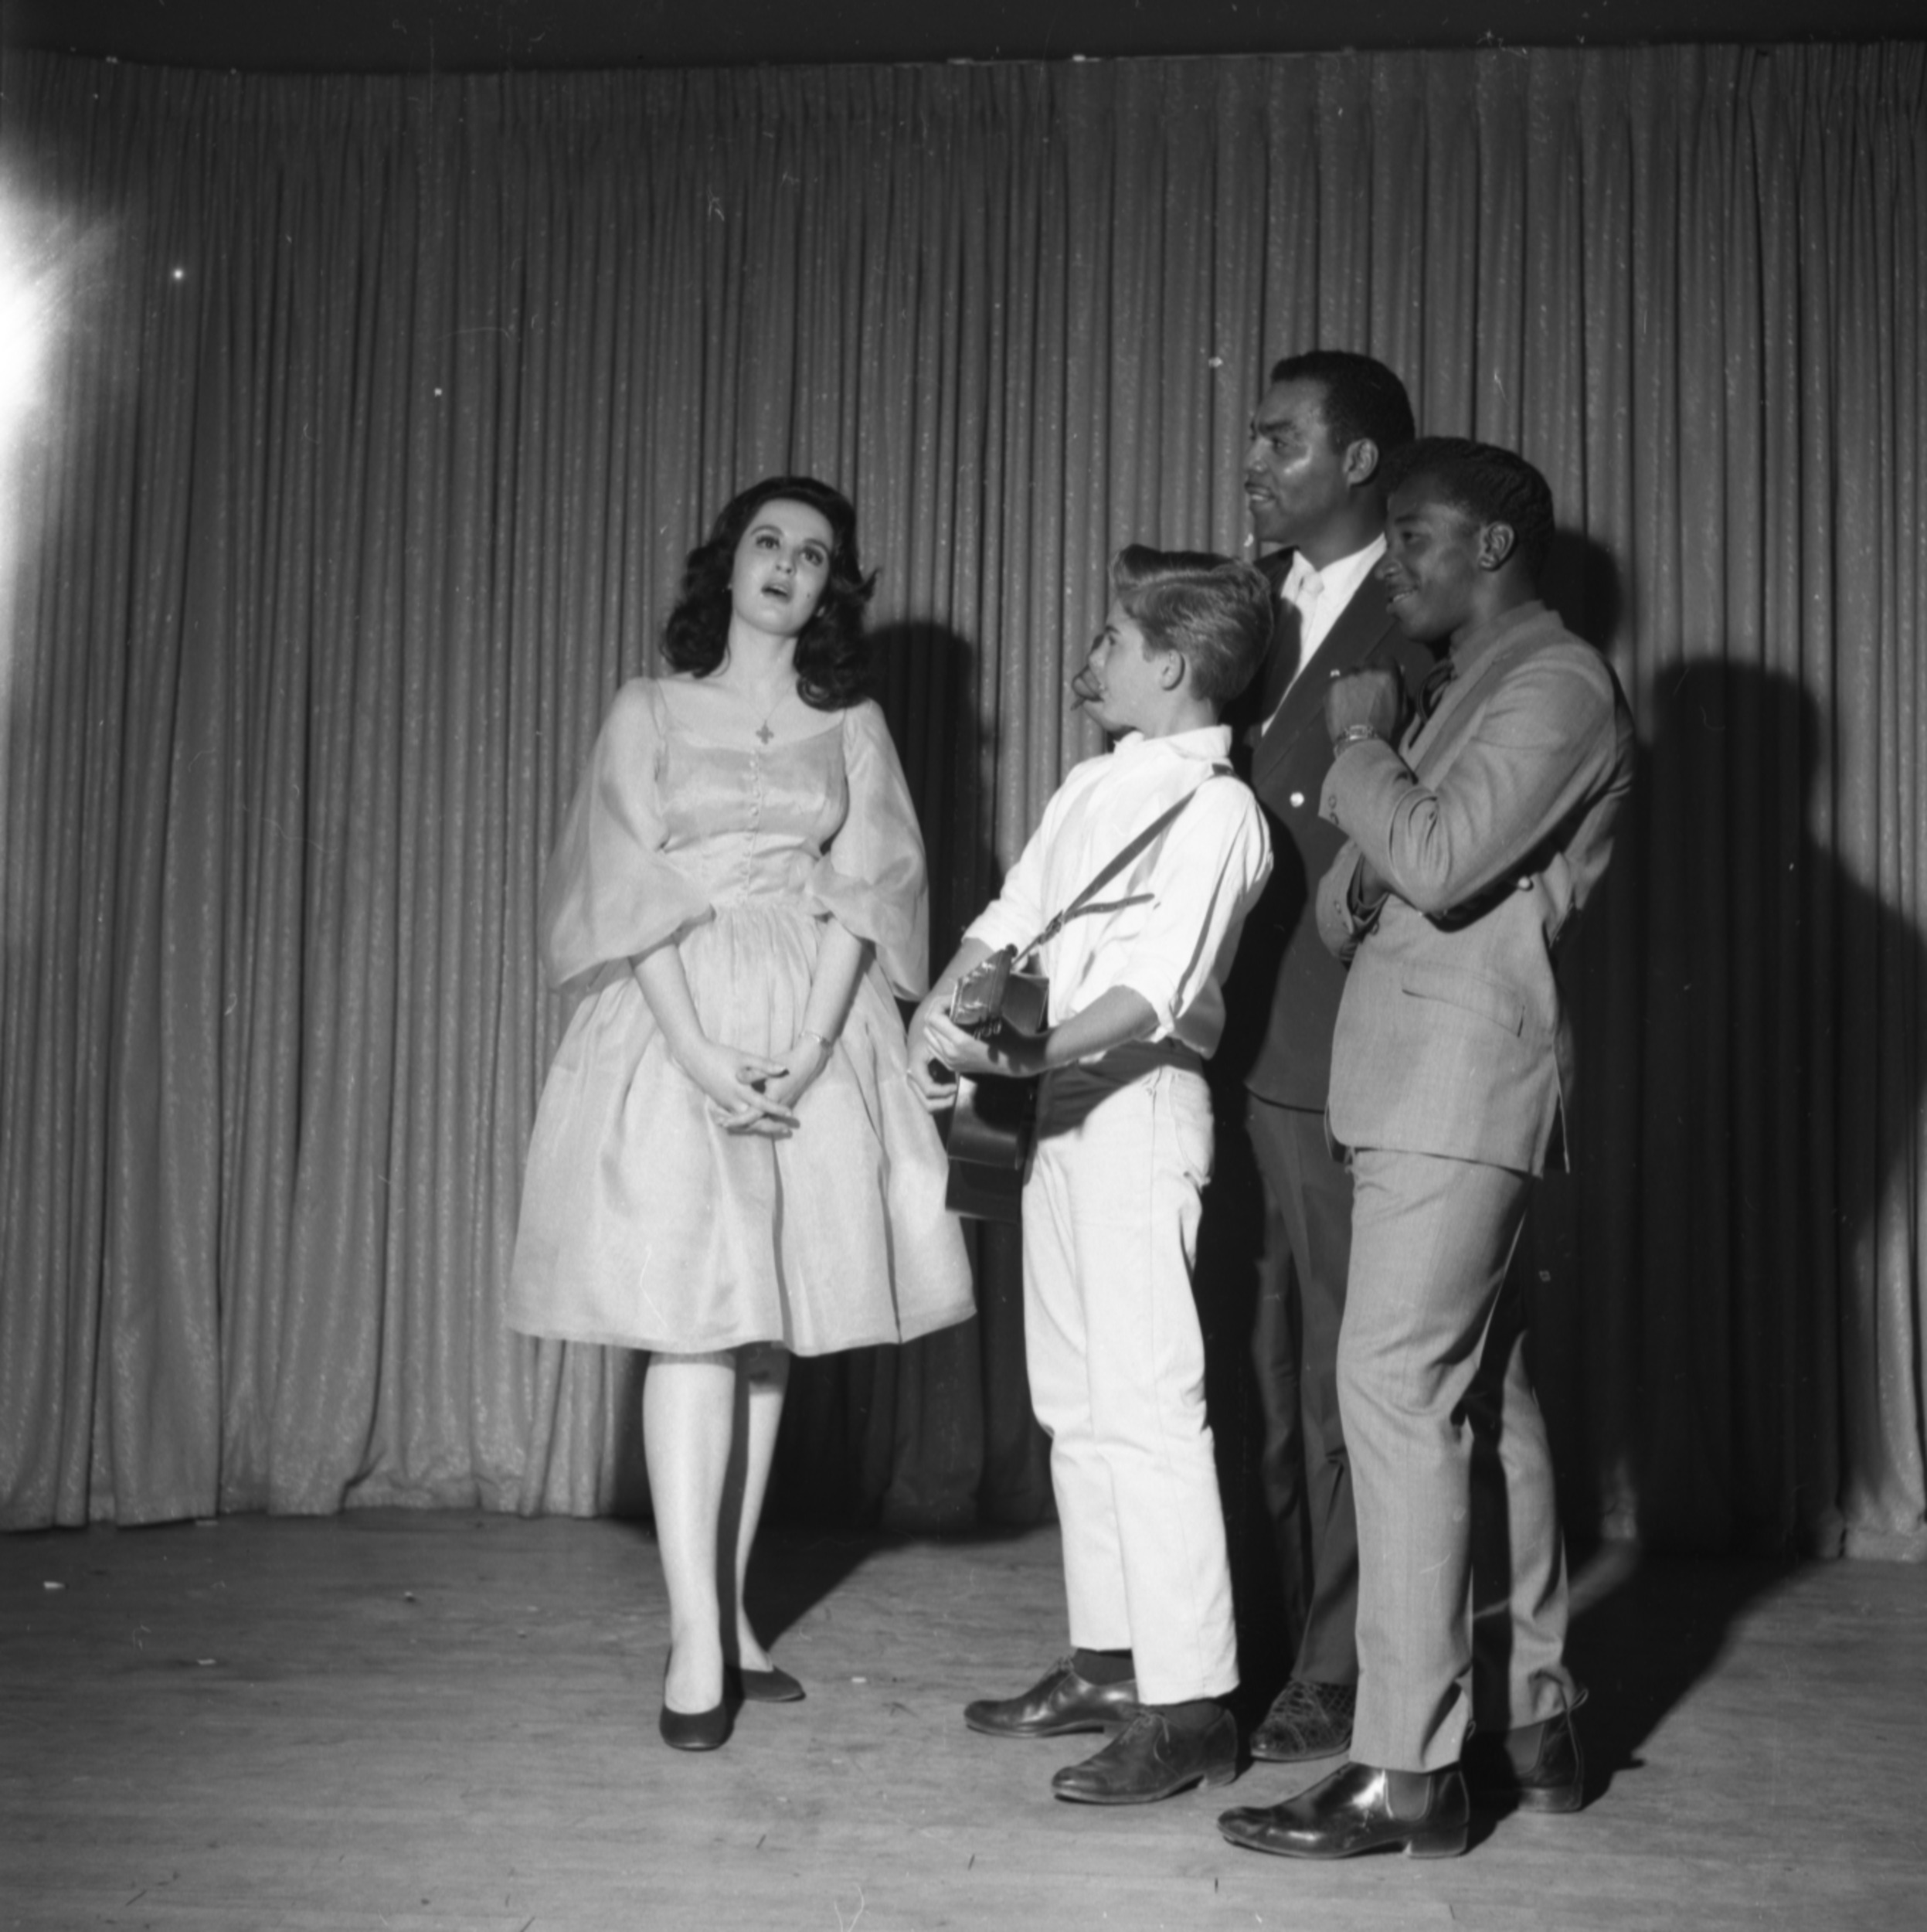 Carver House Talent Contest, May 9, 1962, Image 01